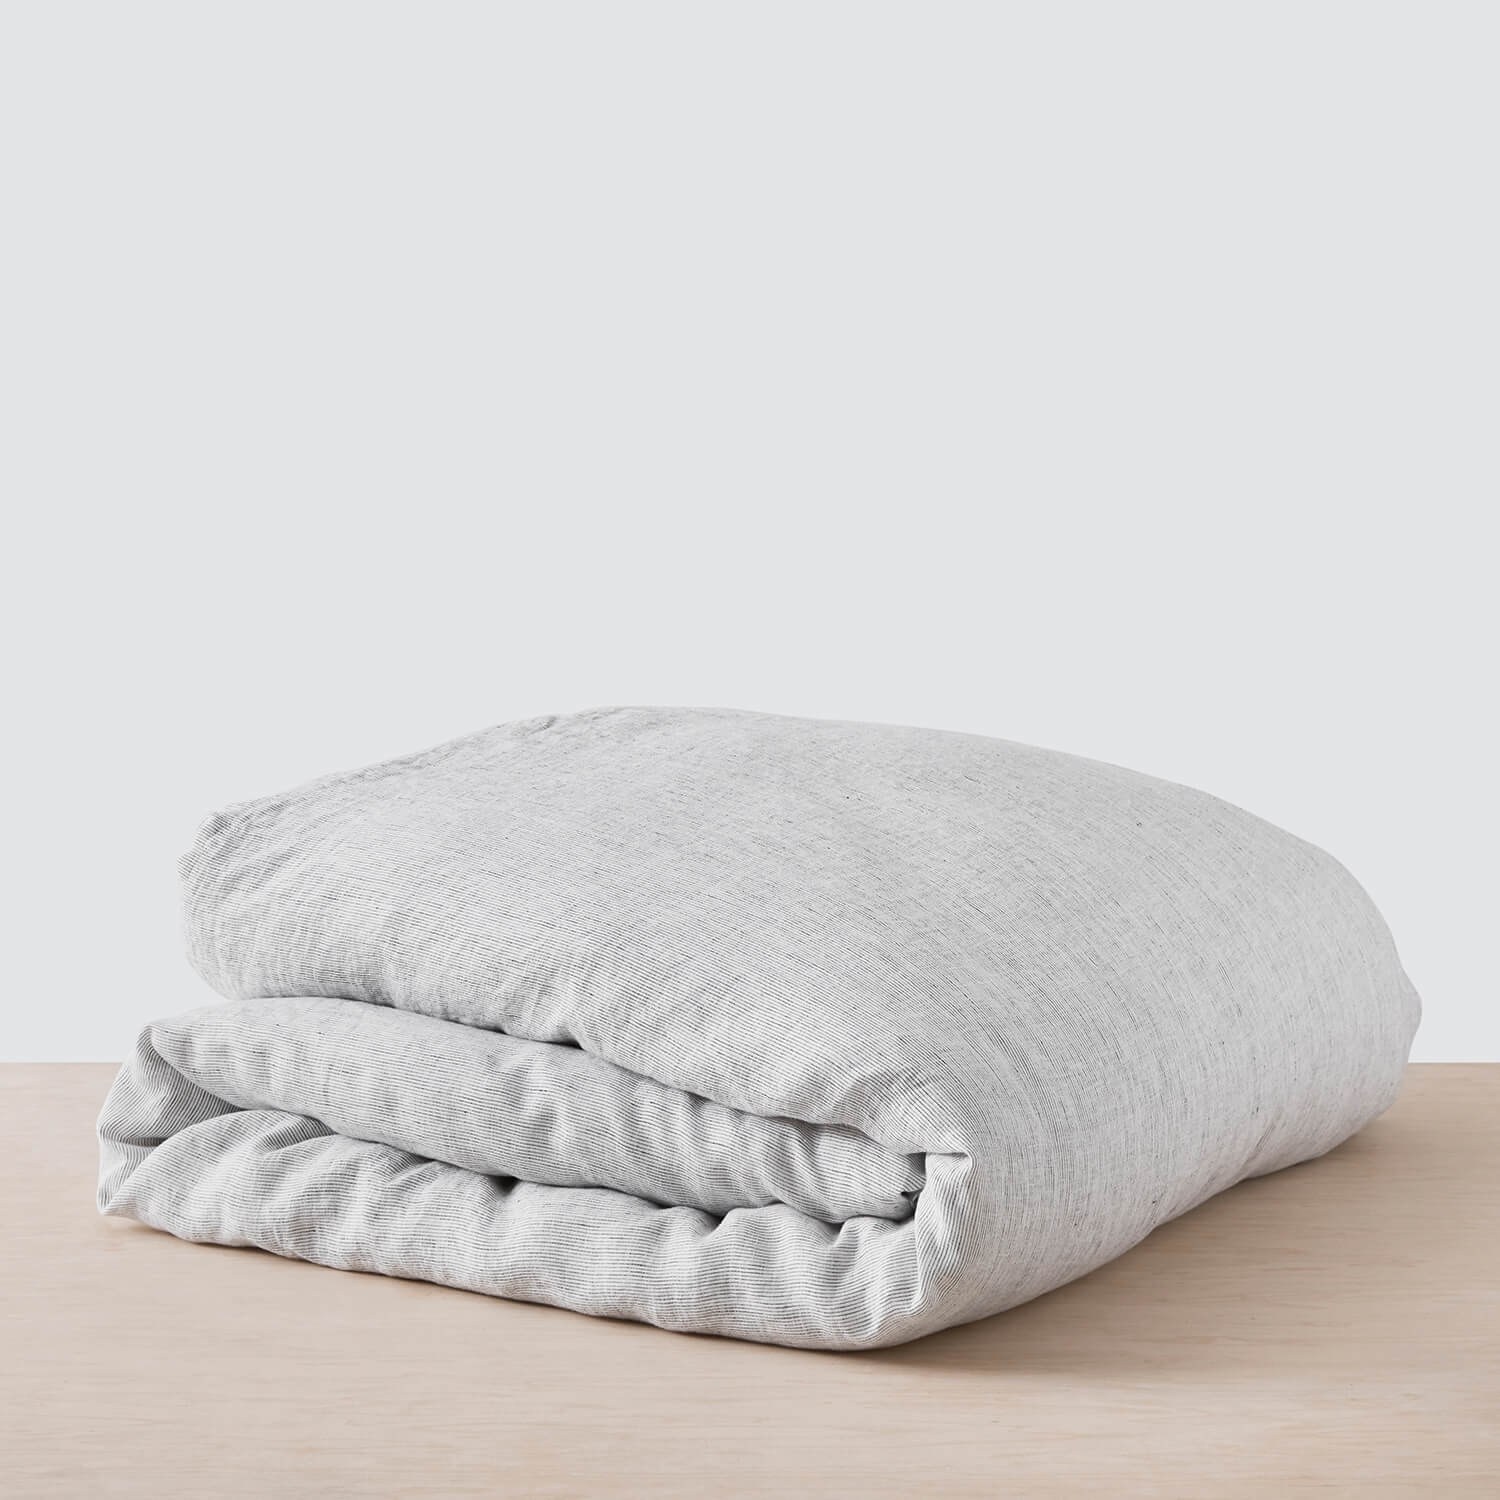 The Citizenry Stonewashed Linen Duvet Cover | Full/Queen | Duvet Only | Sand - Image 2